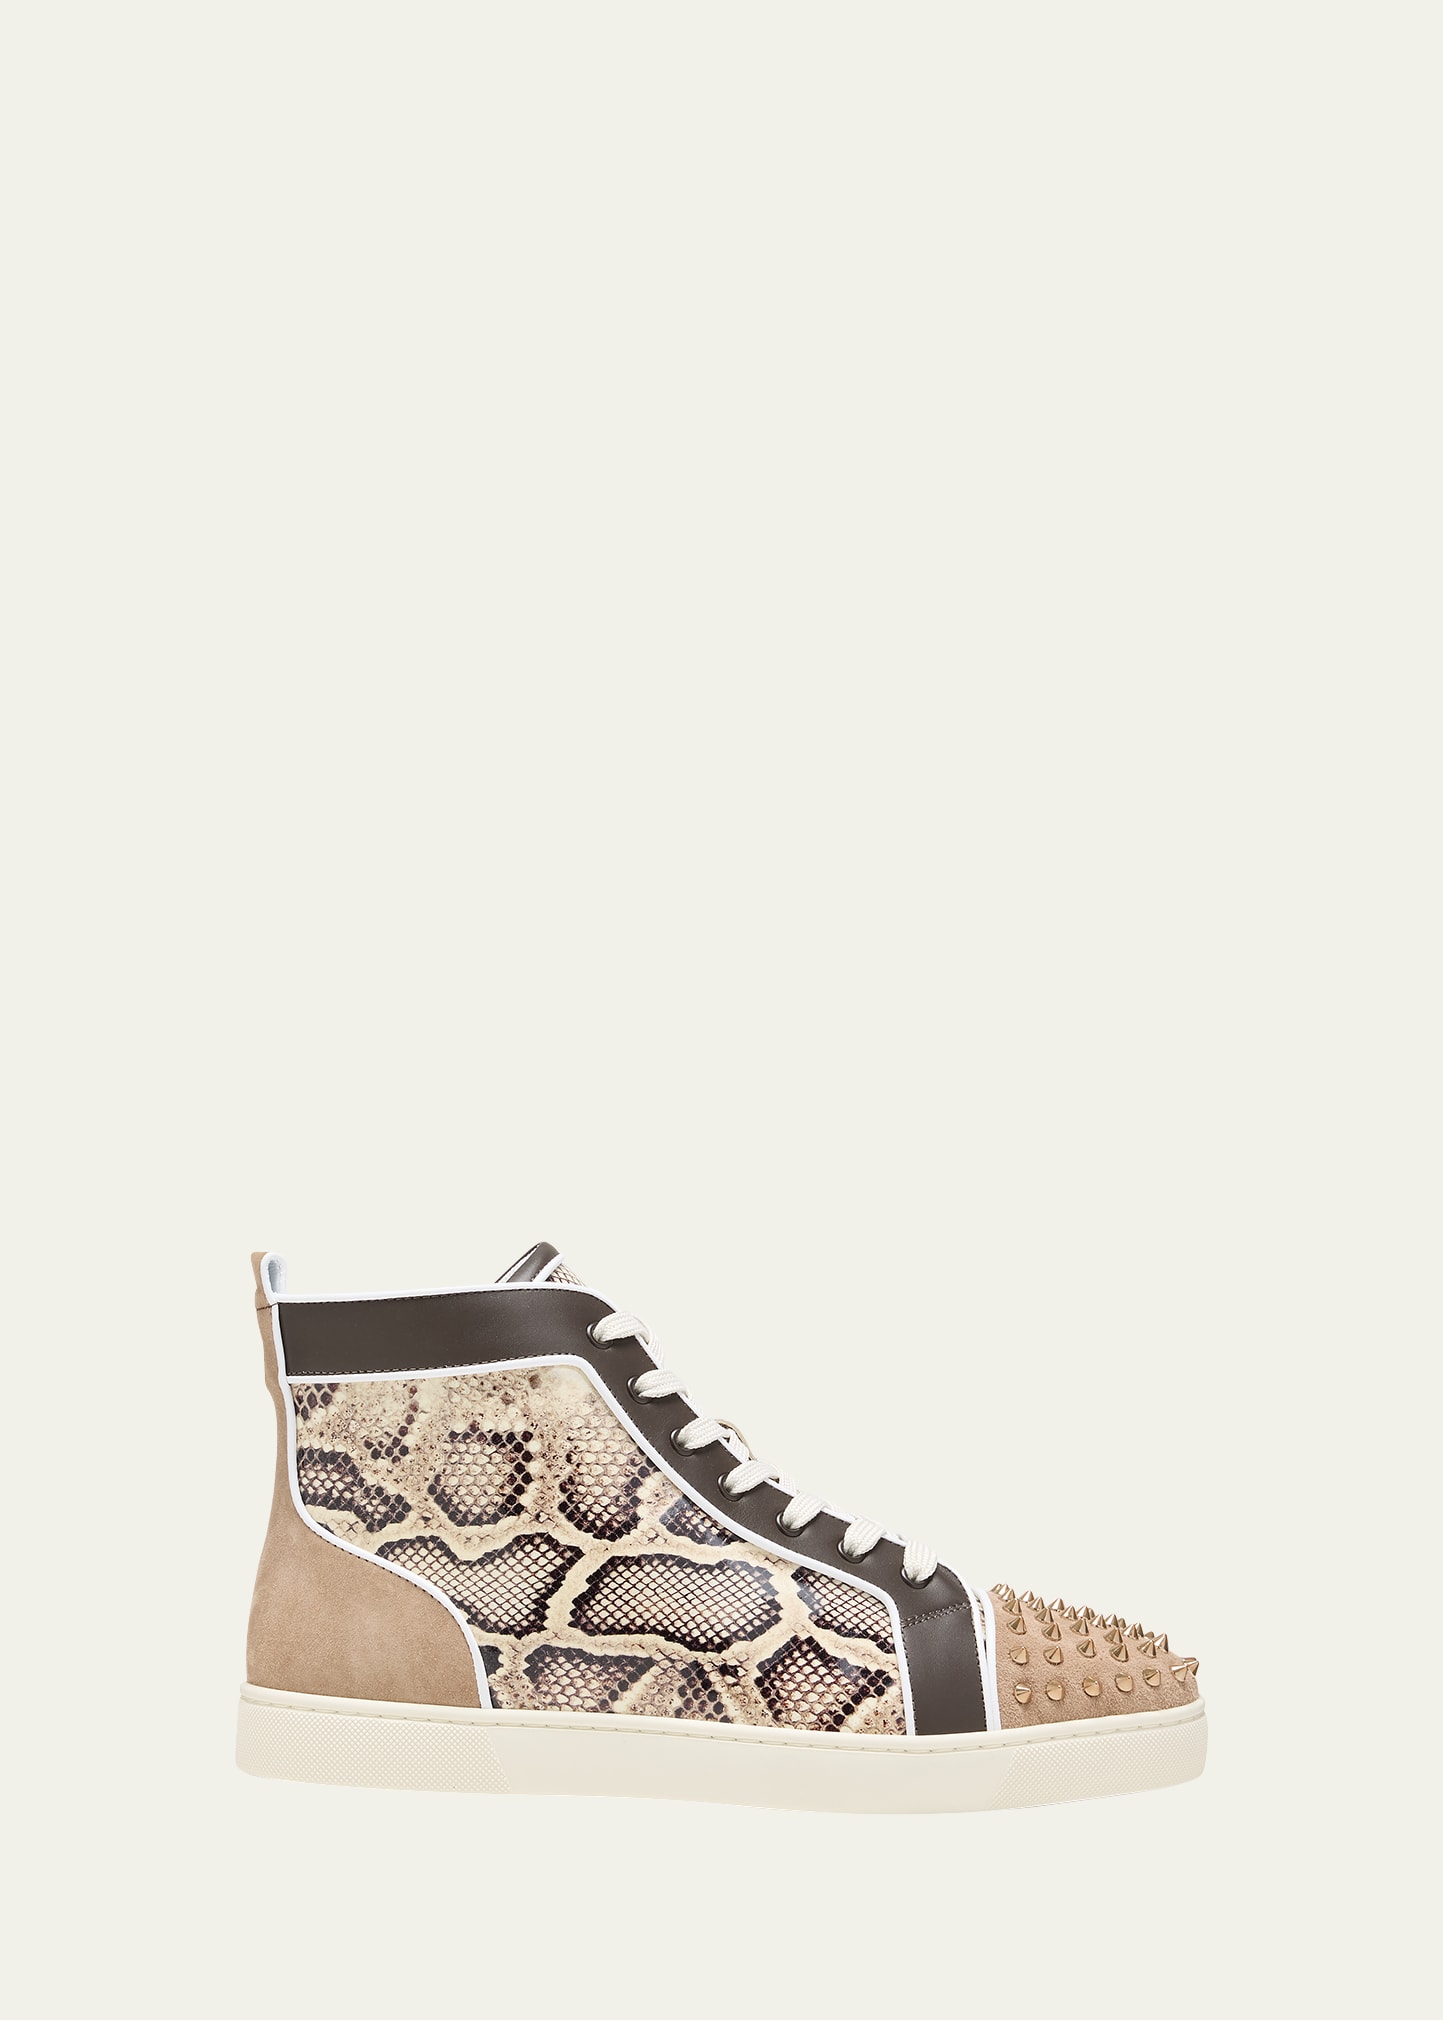 Christian Louboutin Men's Lou Spikes High-top Leather Sneakers In Animal Print